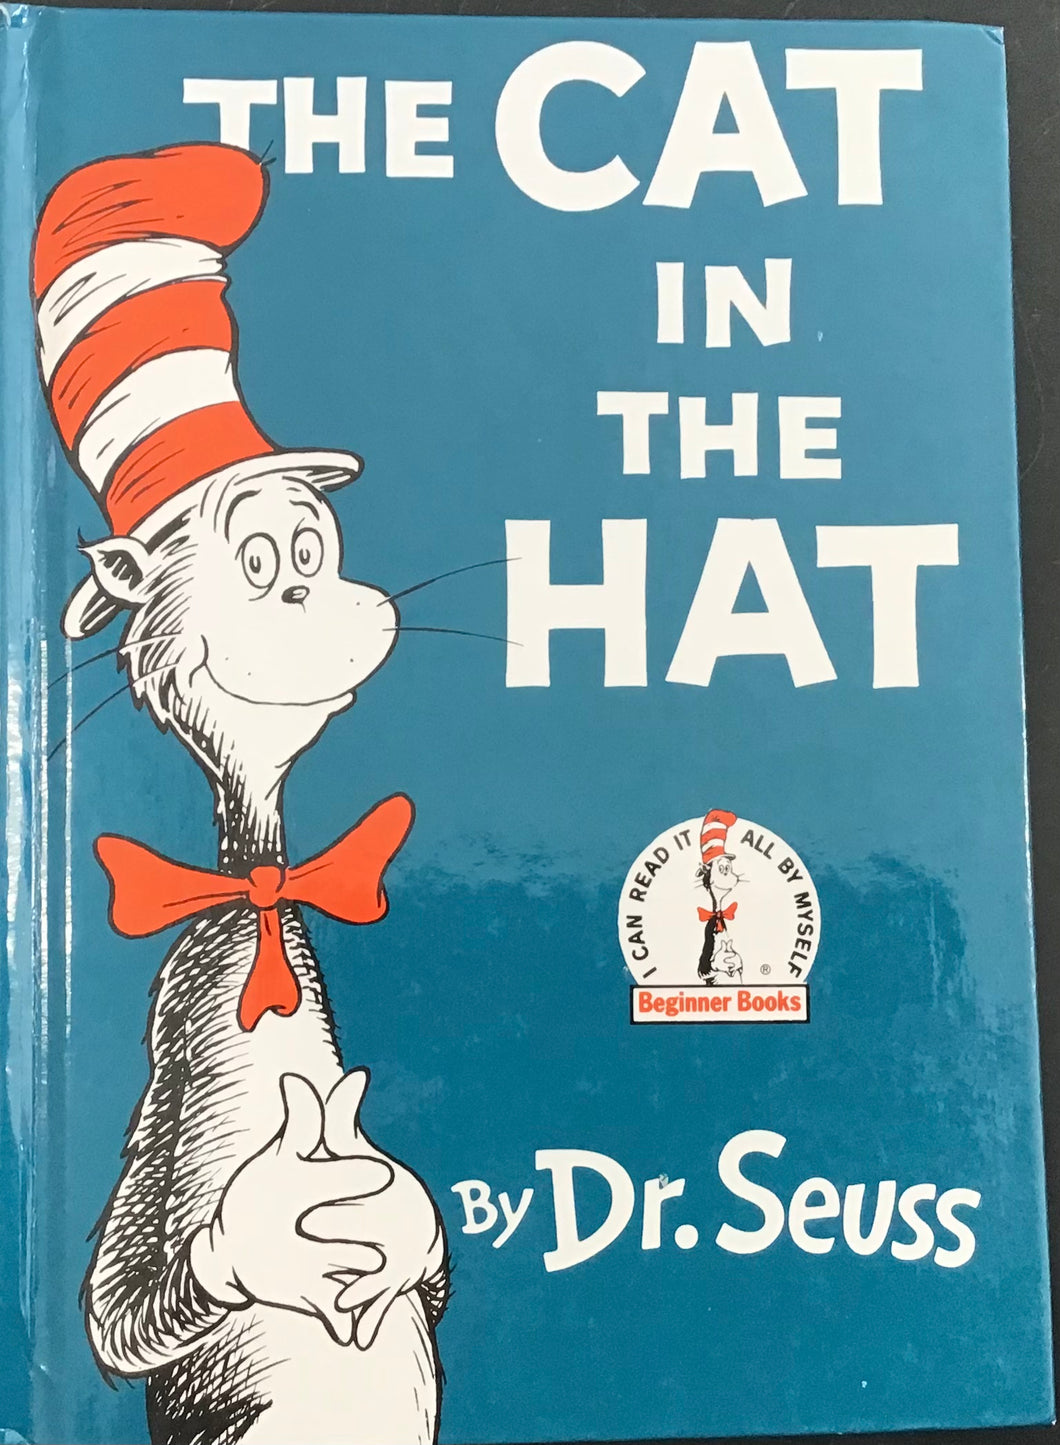 The Cat in The Hat, Dr. Seuss